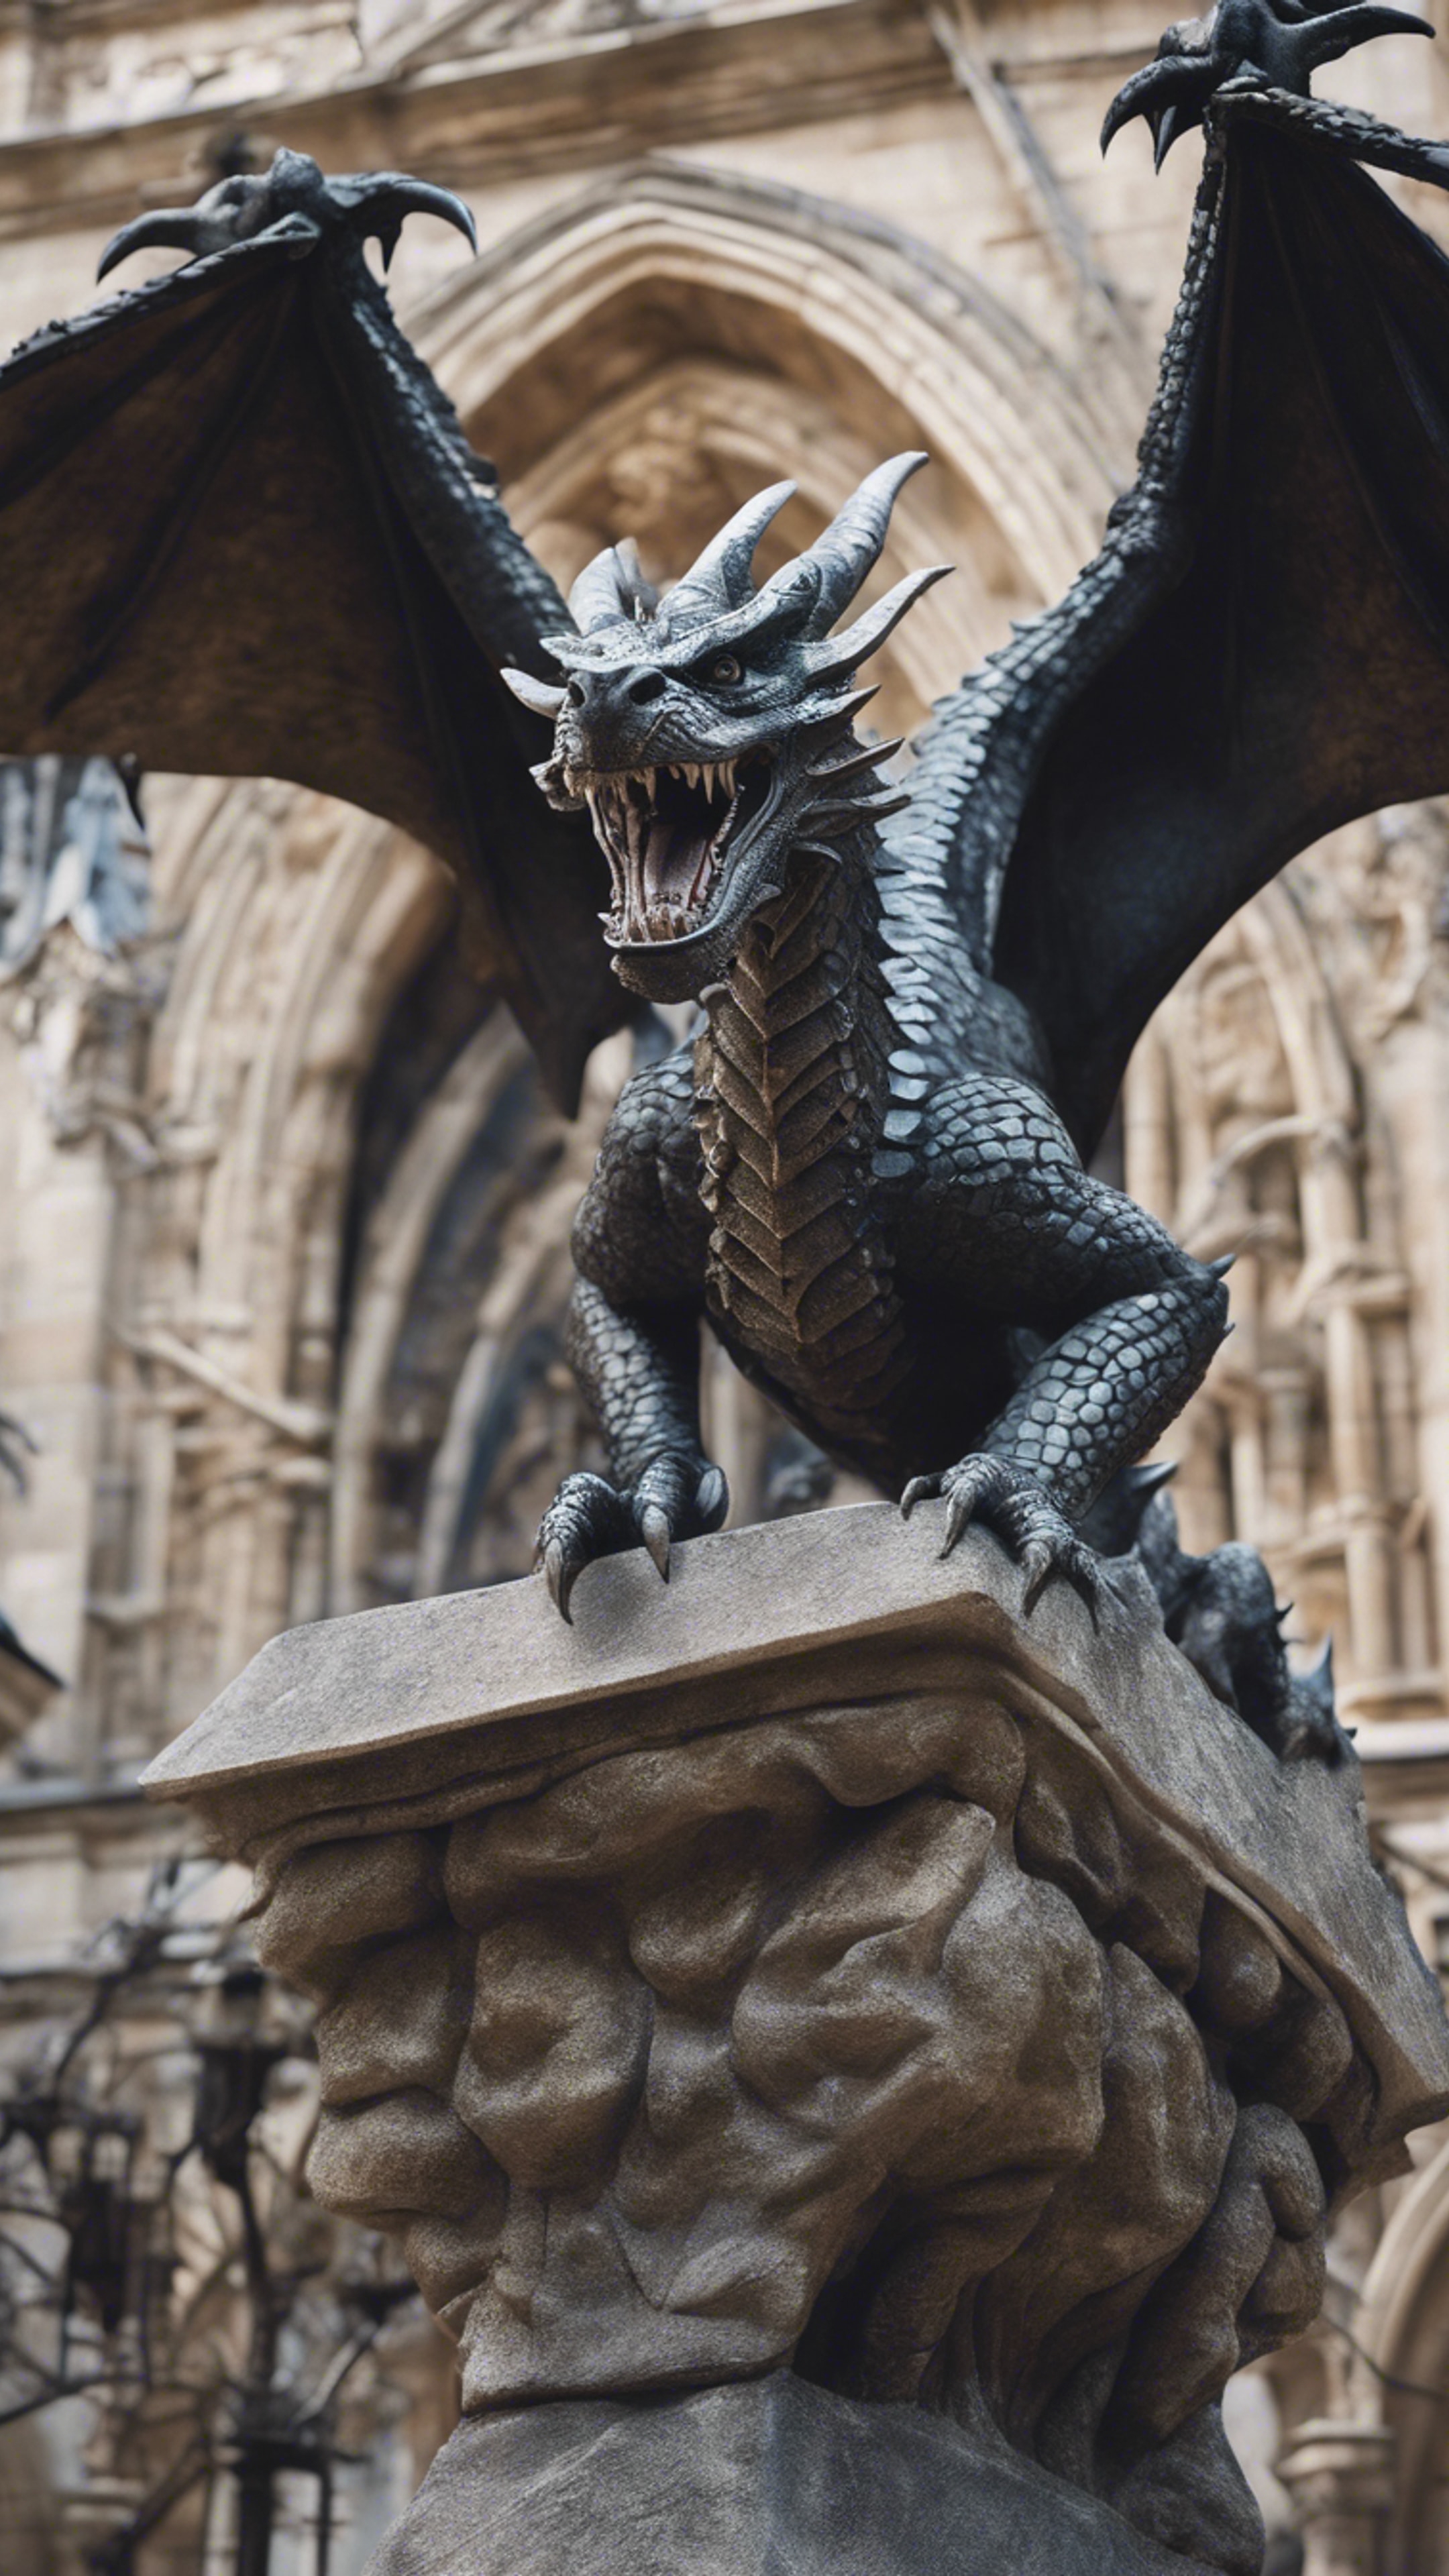 A stone dragon coming to life from the sculpture in a gothic cathedral's courtyard. Sfondo[86d9df9db55943e58db6]